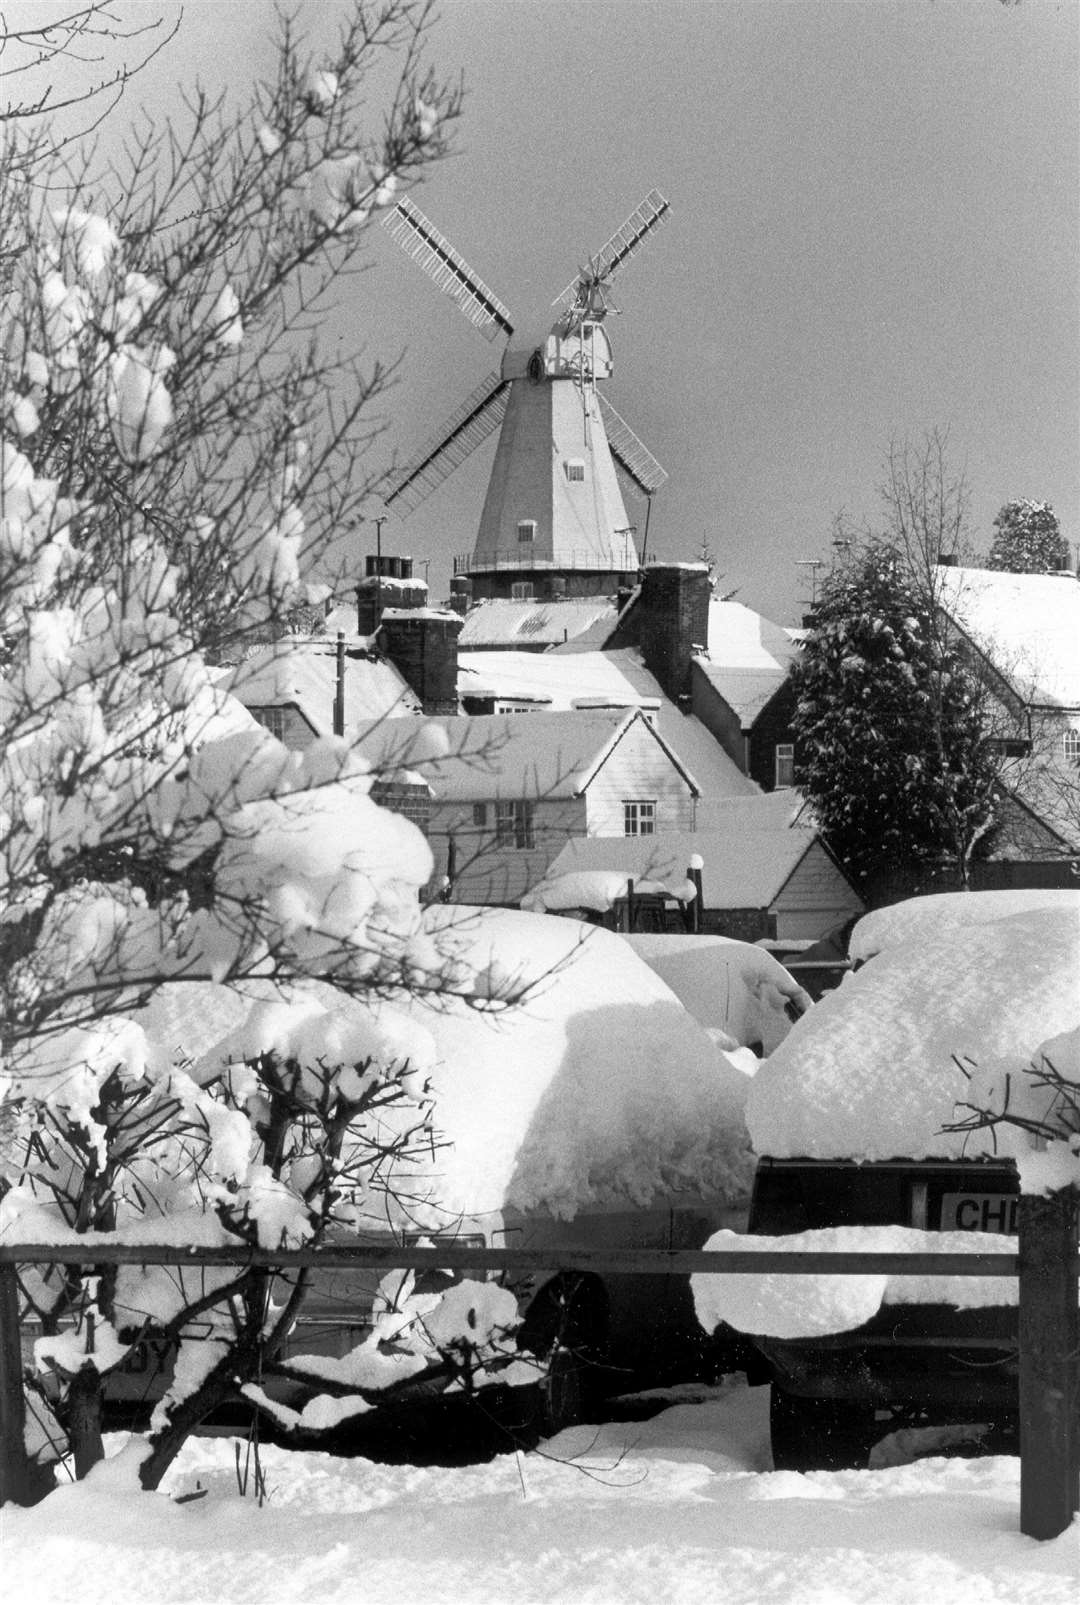 A wintry, picture-postcard setting of Cranbrook in January 1987